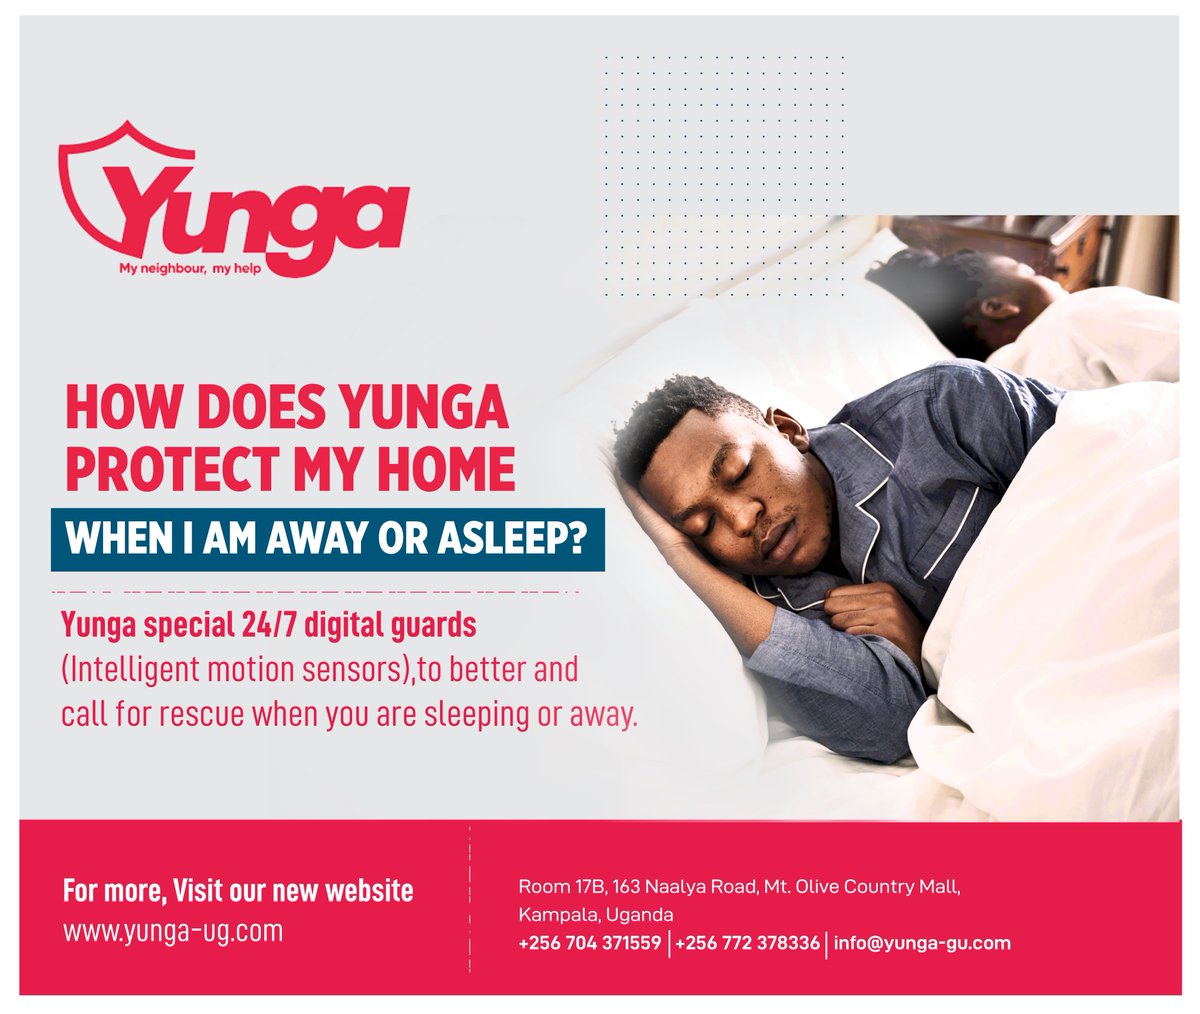 Popular QN: How does Yunga protect my home when I'm away or asleep? Yunga uses special 24/7 digital guards(Intelligent motion sensors), to call for rescue when you are sleeping or away. You can choose to turn them on manually or set an Auto arm. For more👉yunga-ug.com